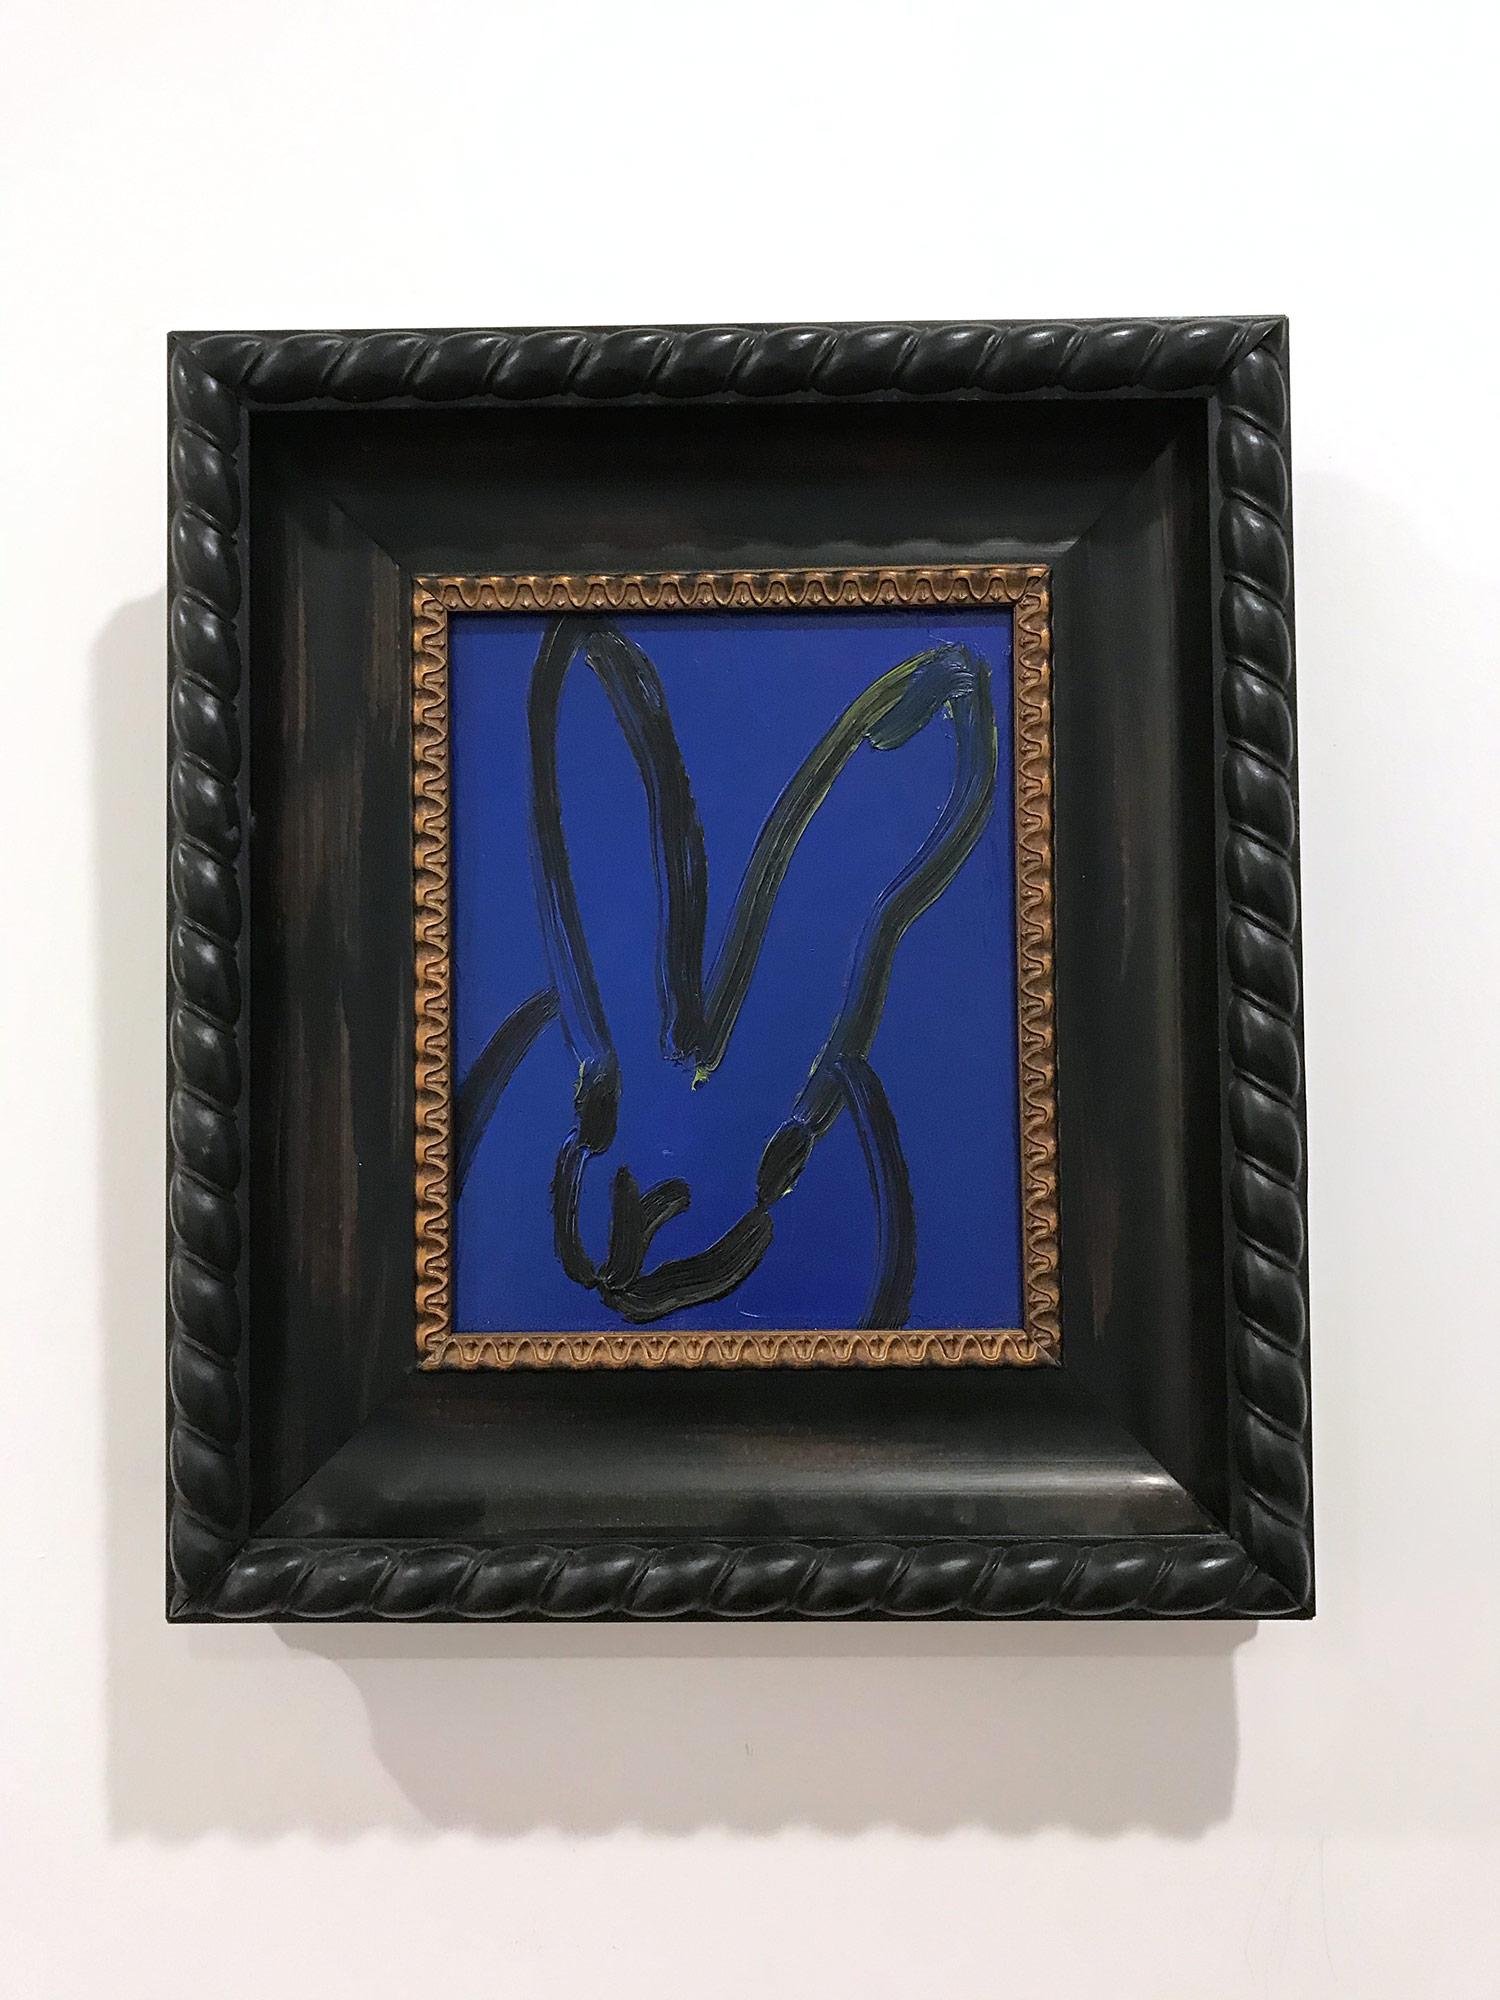 Untitled (Black Outlined Bunny on Midnight Blue Background) Oil on Wood Panel 2